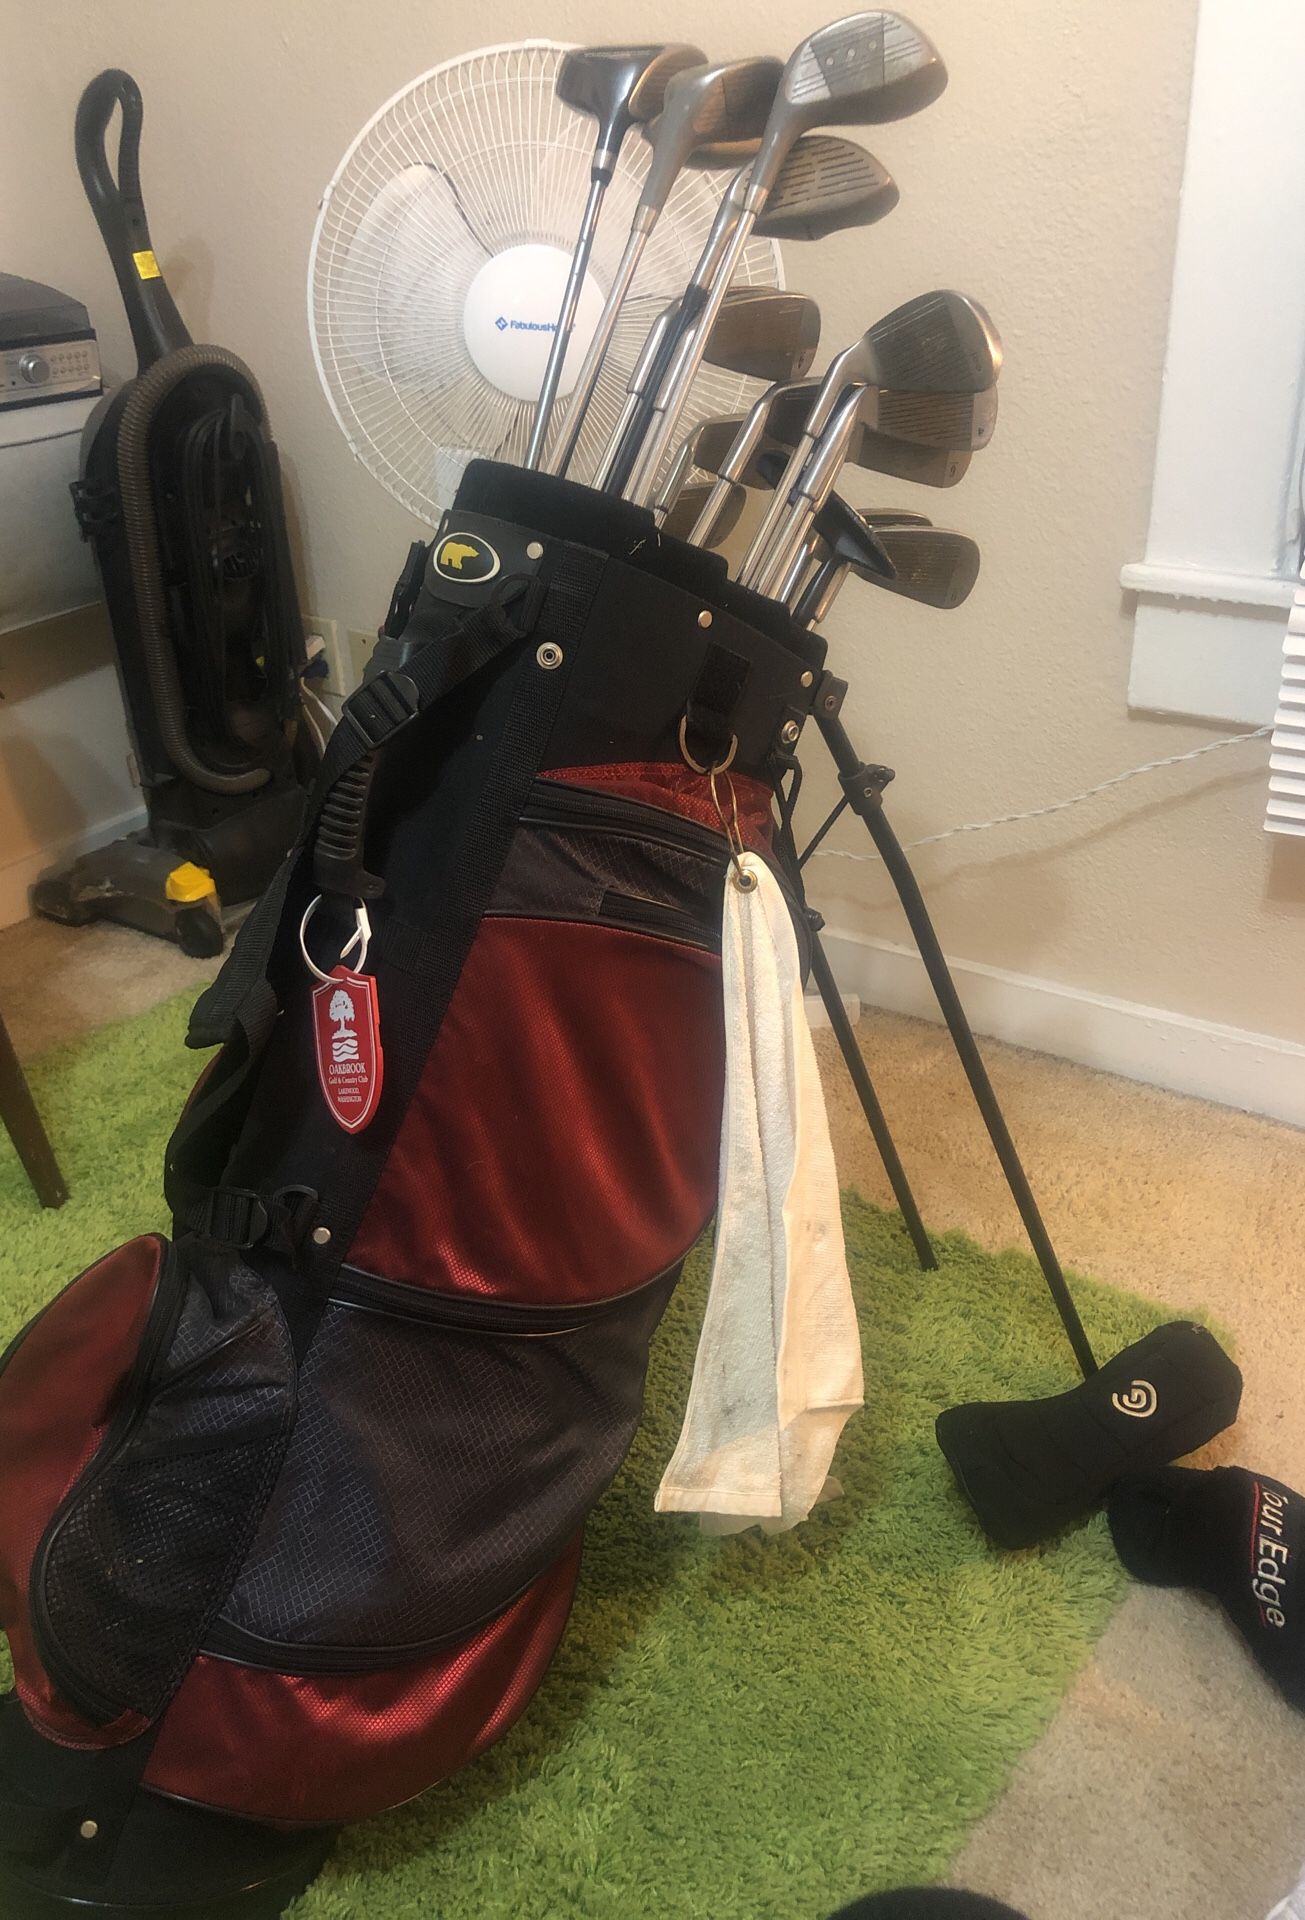 Golf clubs full set. Wilson pro staff mid size and other manufacturers.